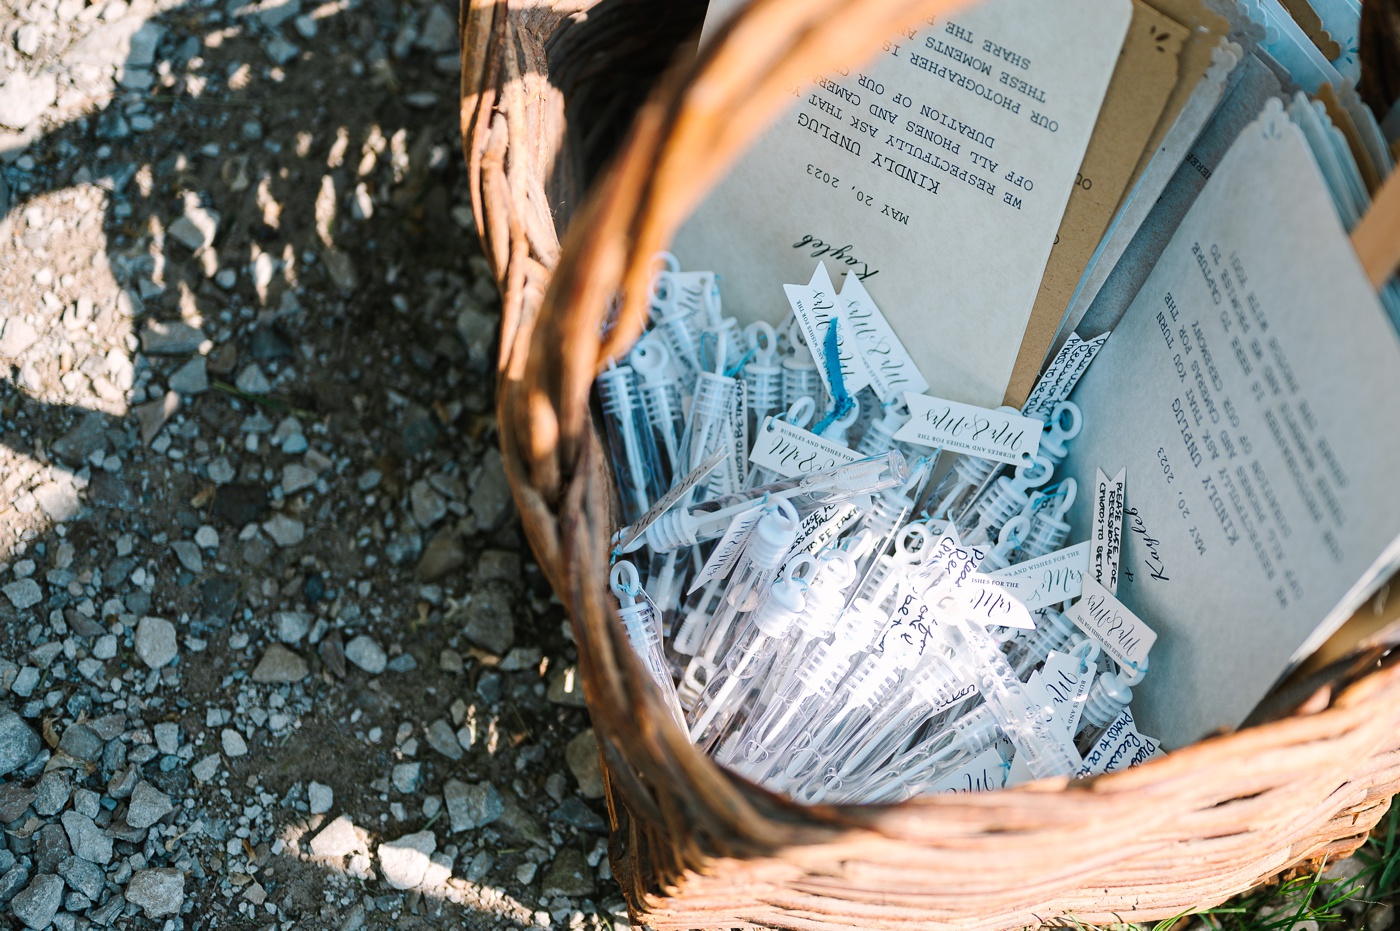 Basket with miniature bubble wands at an outdoor wedding ceremony